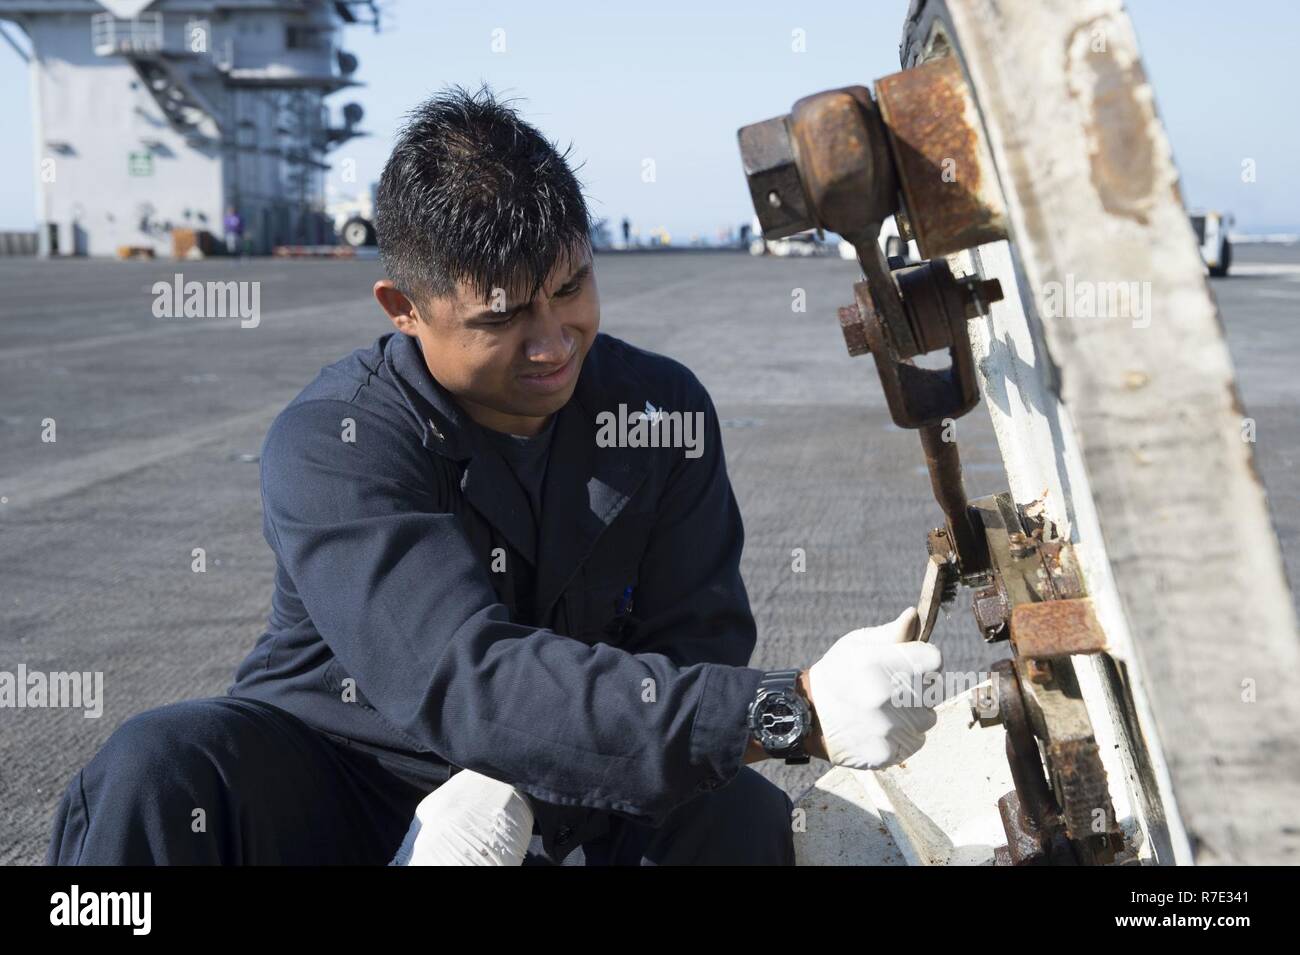 ATLANTIC OCEAN (May 17, 2017) Aviation Boatswain's Mate 3rd Class Ortiz Barreto, from Los Angeles, removes rust from a watertight hatch assembly on the flight deck of the aircraft carrier USS Dwight D. Eisenhower (CVN 69) (Ike). Ike is currently underway conducting engineering drills as part of the sustainment phase of the Optimized Fleet Response Plan (OFRP). Stock Photo